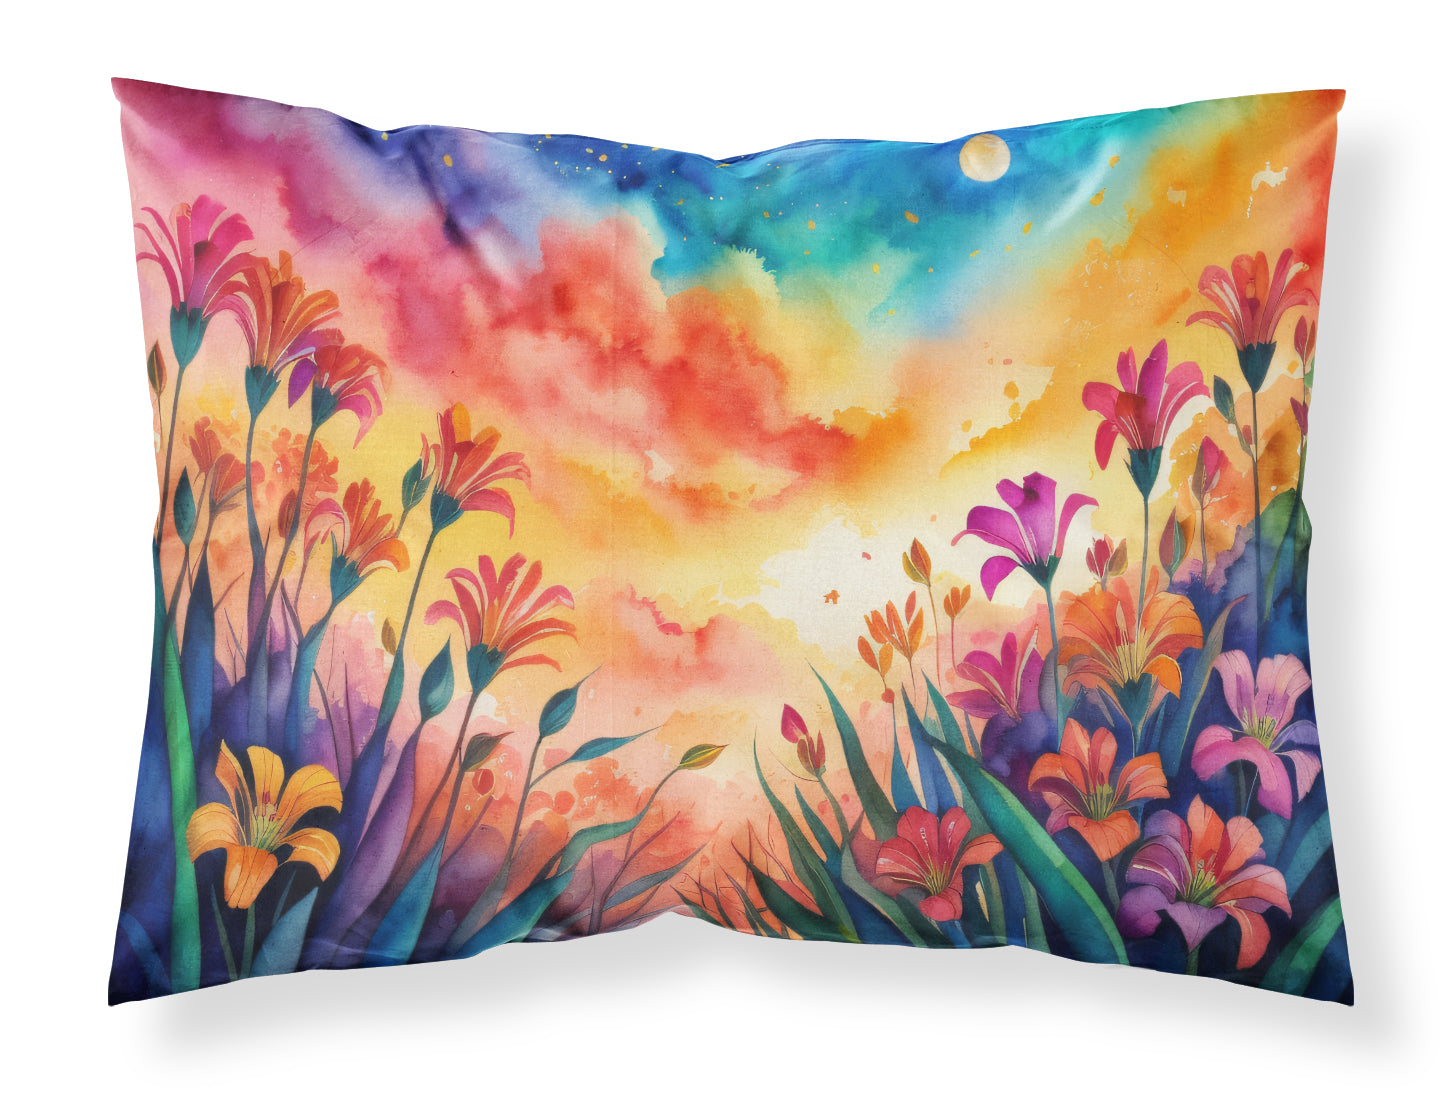 Buy this Alstroemerias in Color Fabric Standard Pillowcase